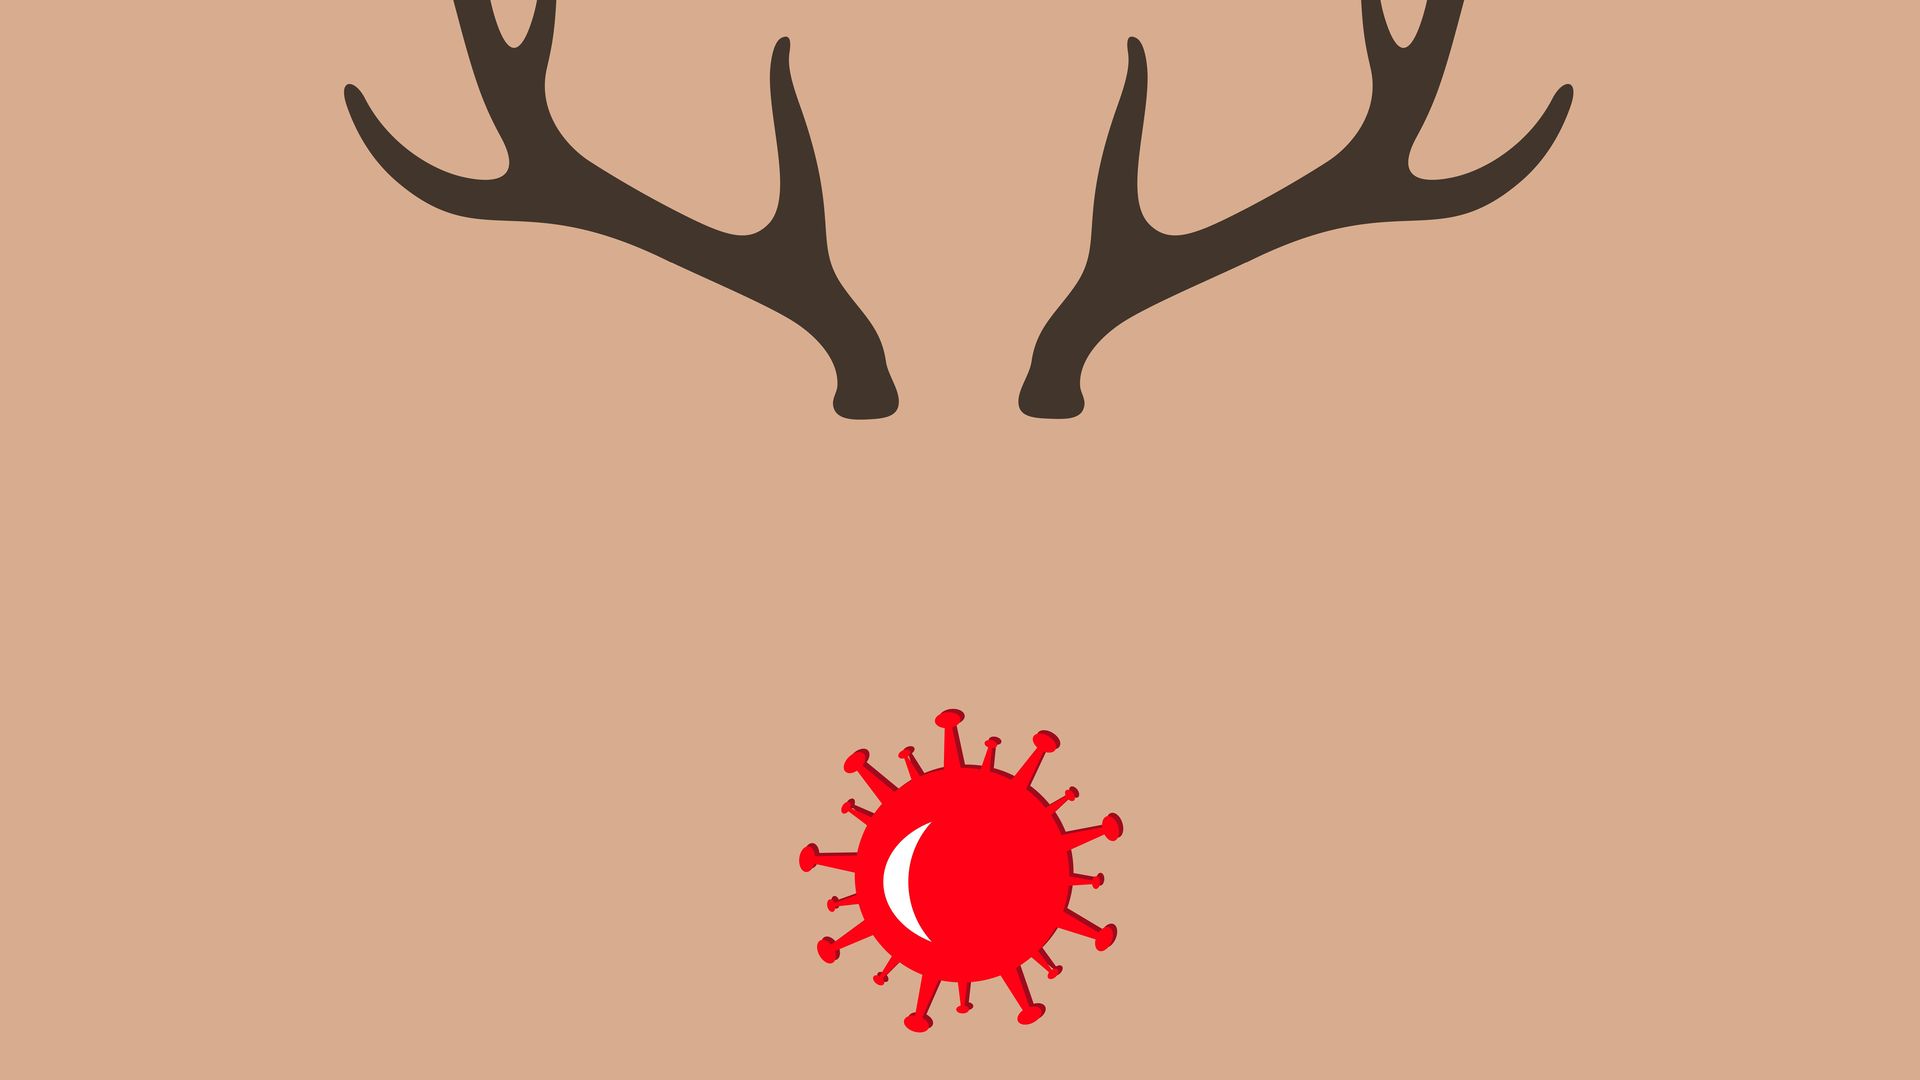 Illustration of simplified Rudolph the Red Nosed reindeer, with a COVID ball as the nose.